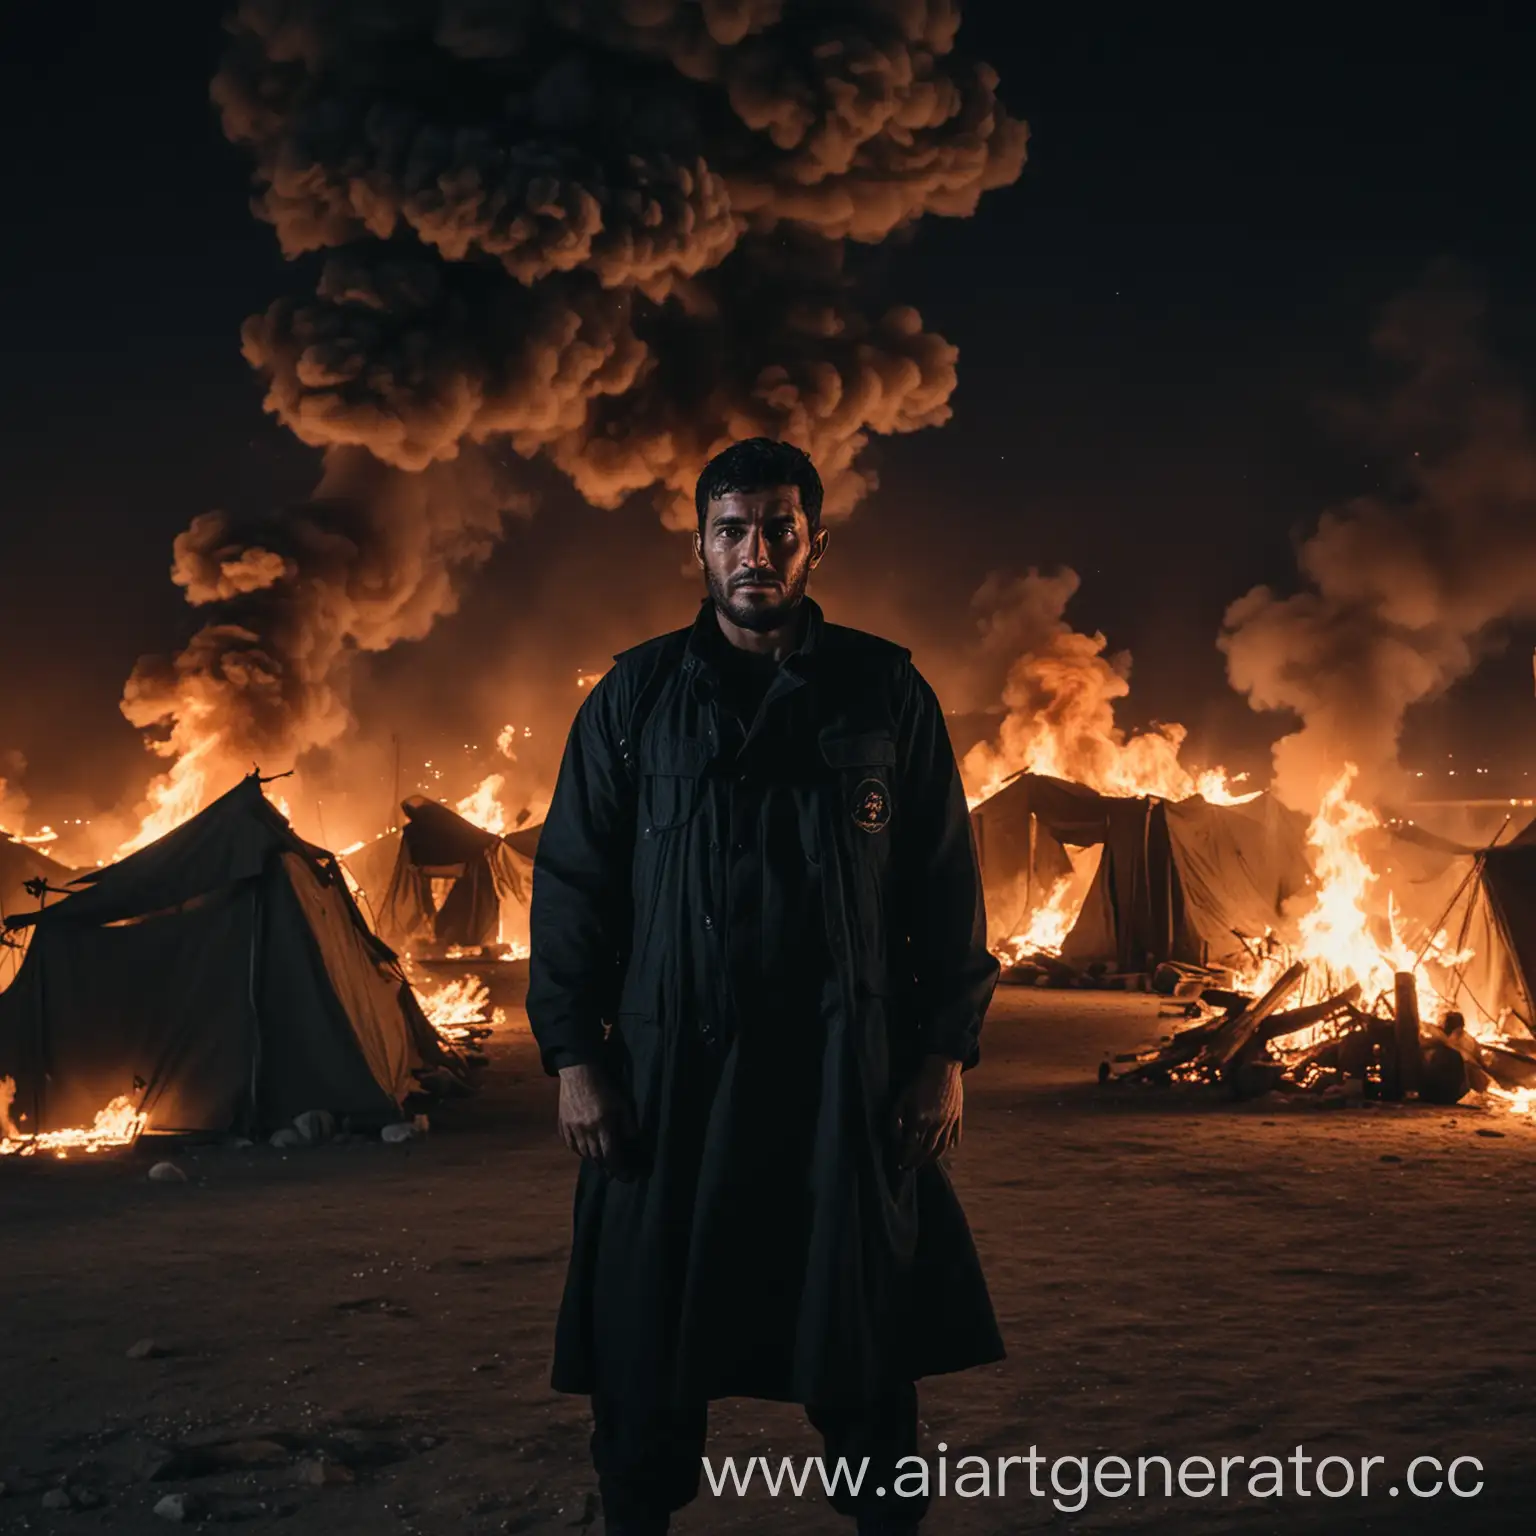 Man-in-Afghanistan-Against-Backdrop-of-Burning-Camp-at-Night